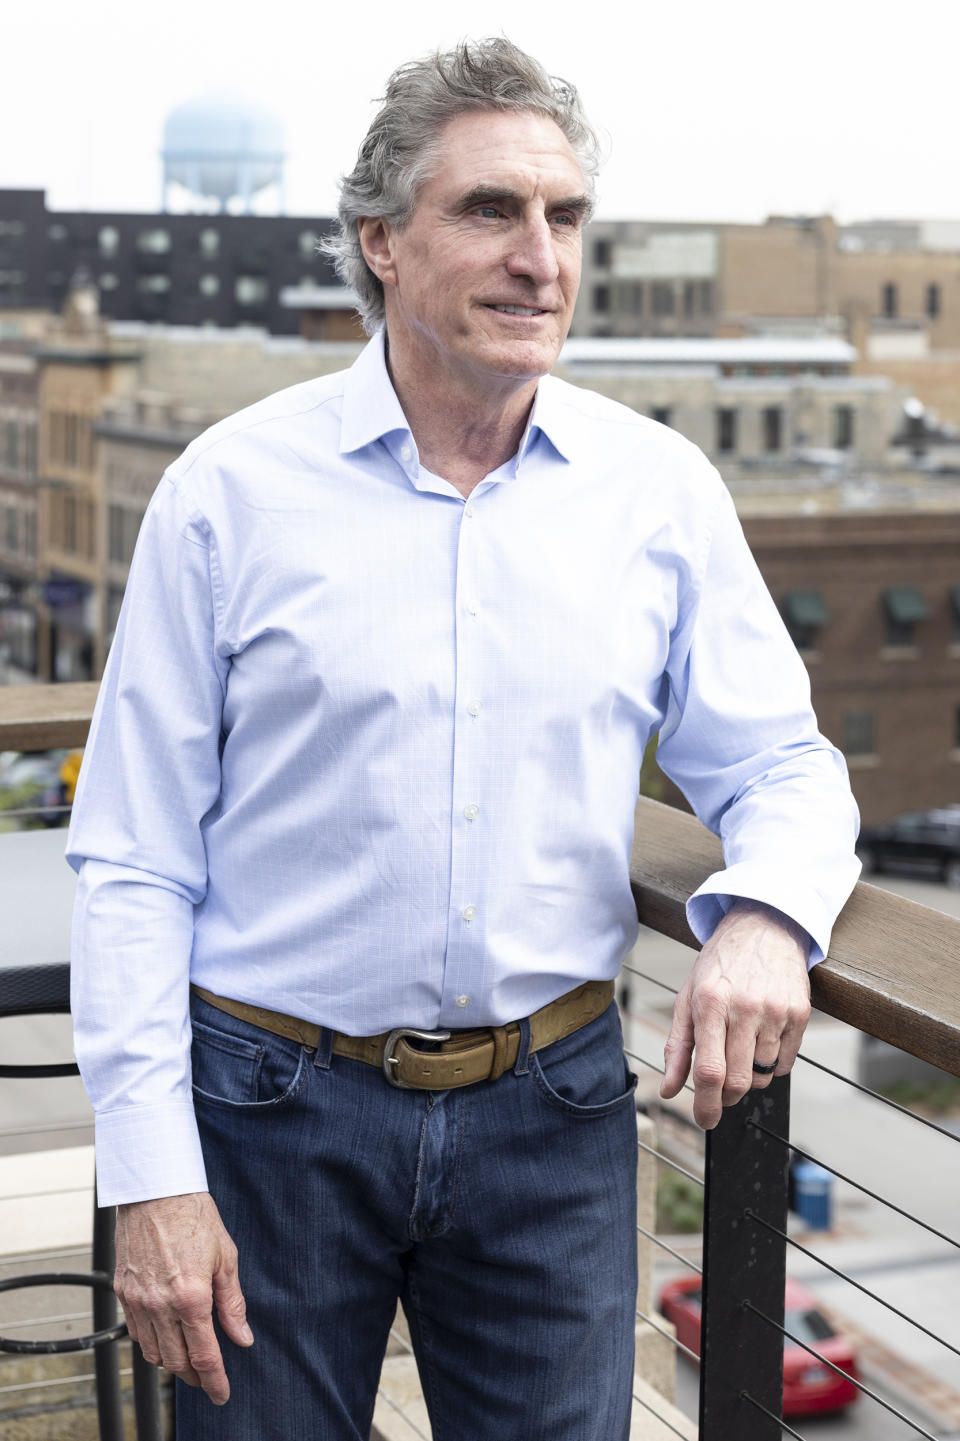 Doug Burgum on the rooftop patio of the Fargo development firm he founded. (Tim Gruber for NBC News)